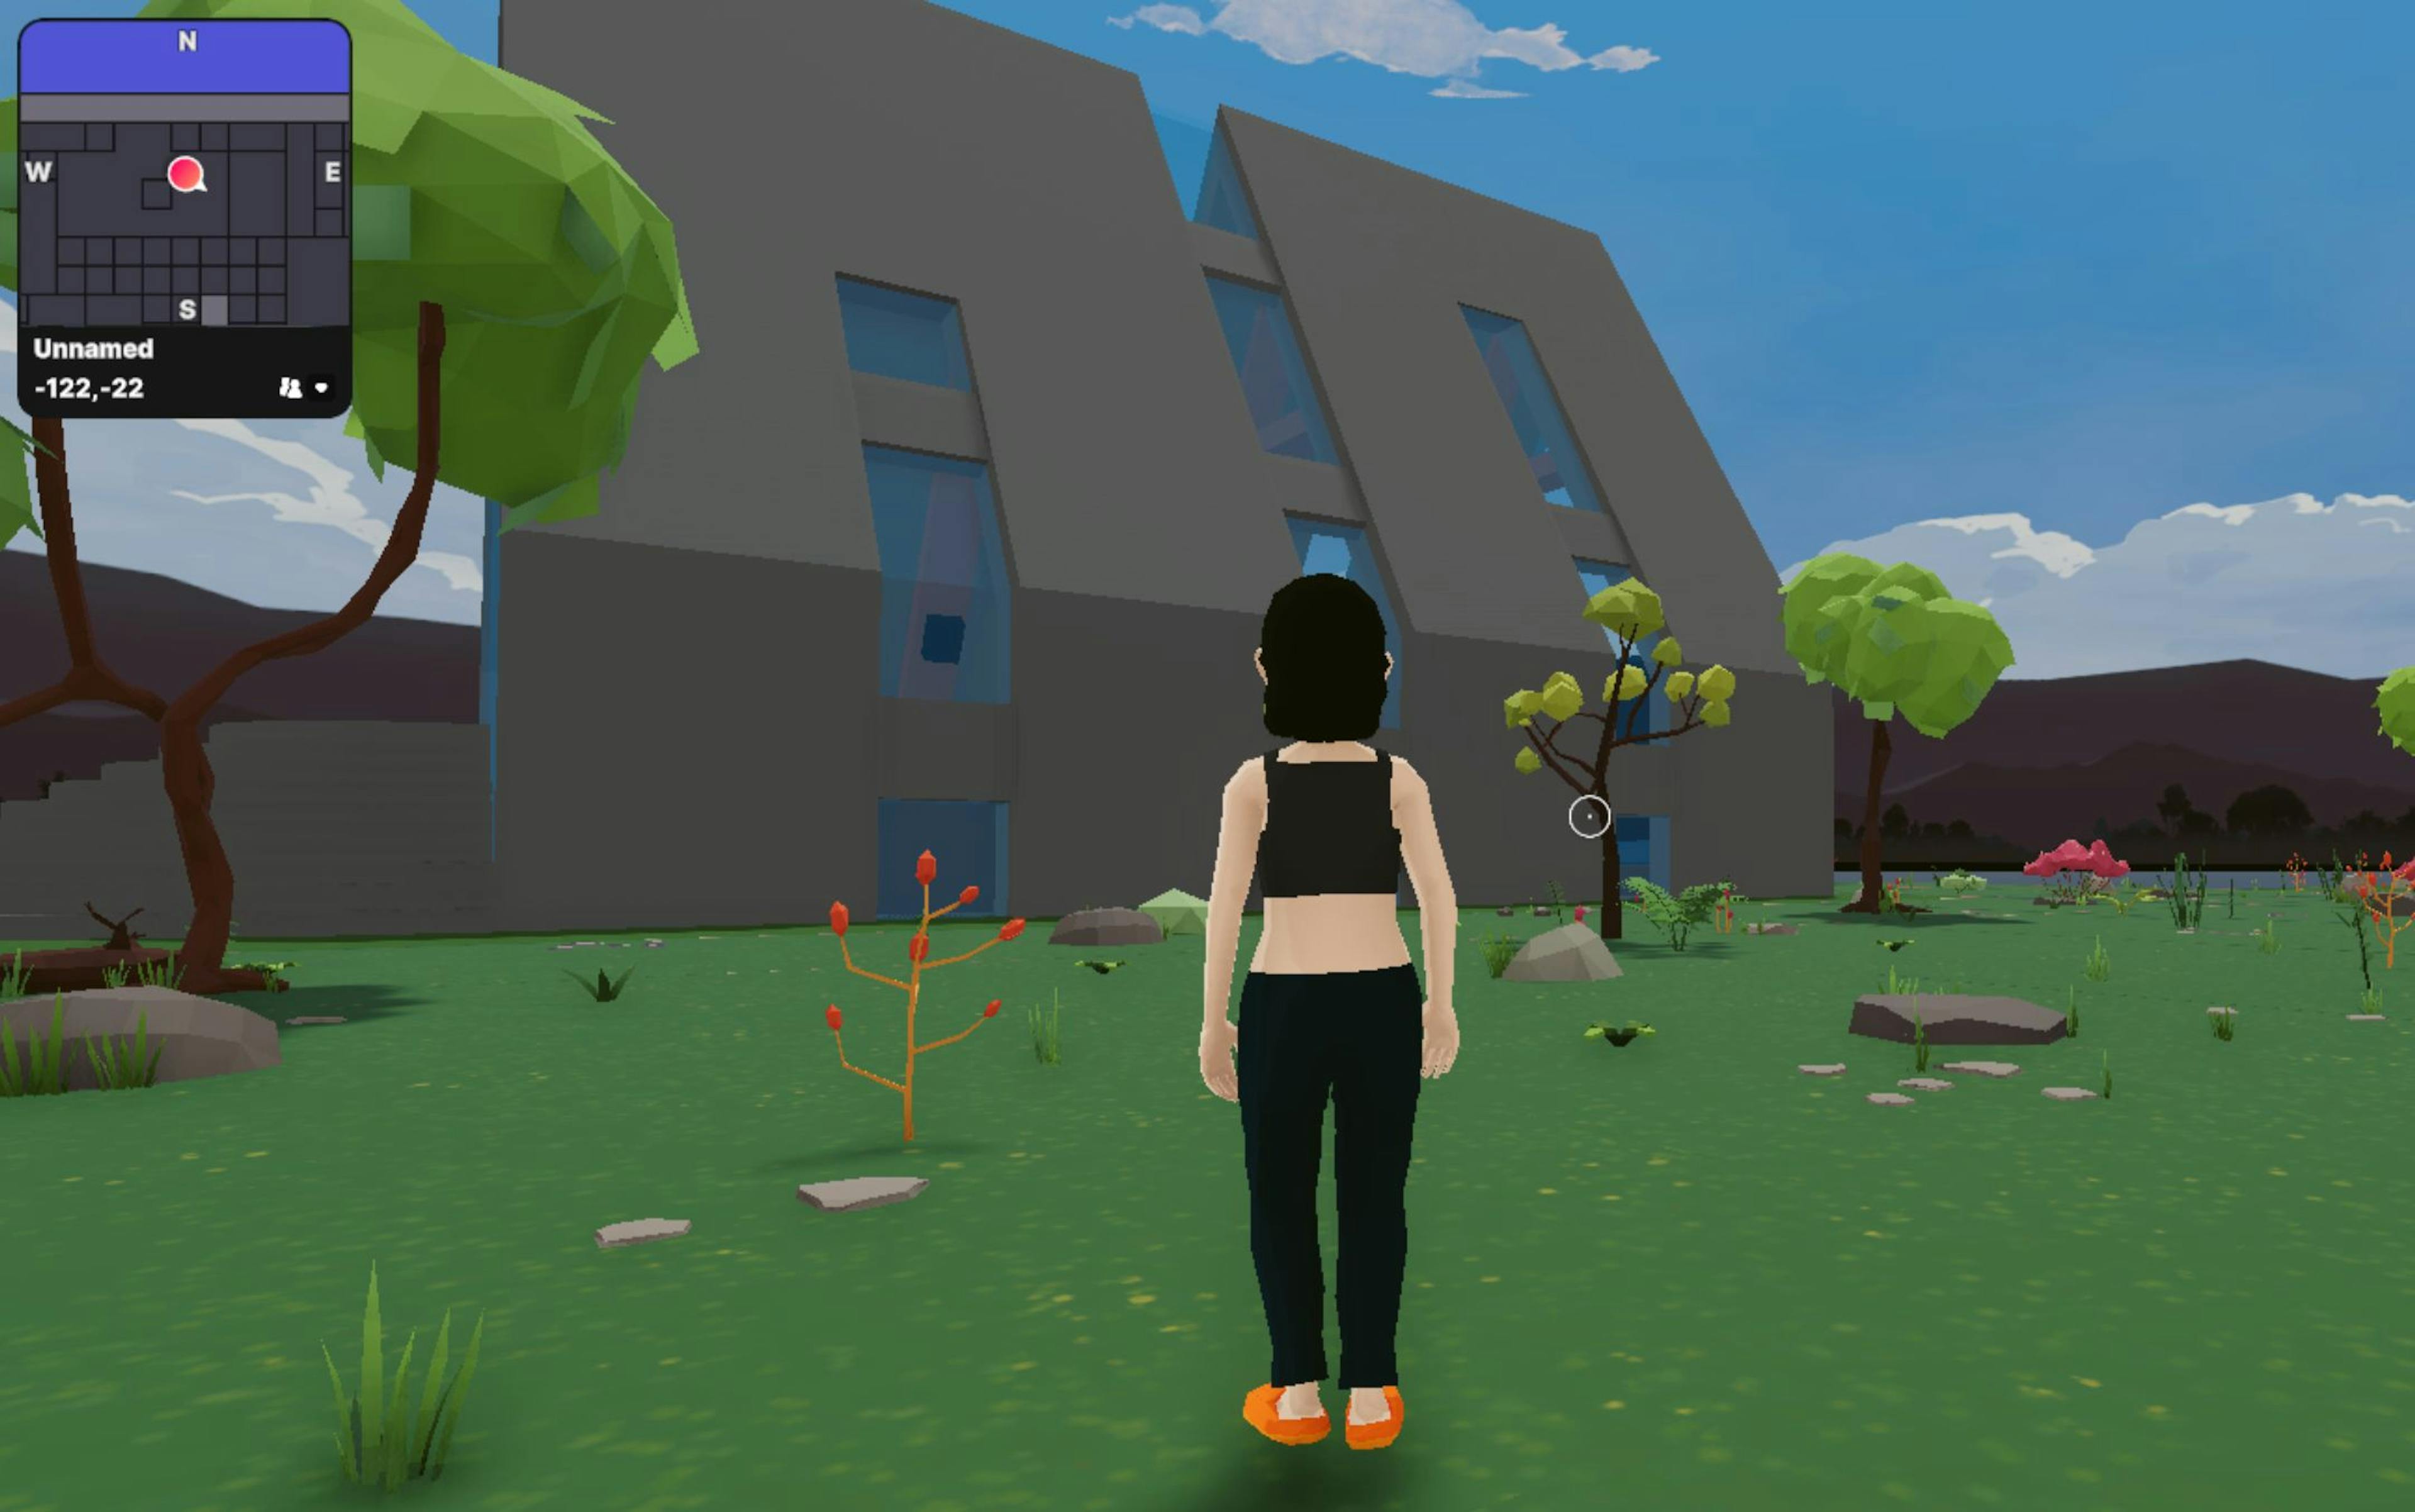 featured image - Owning Digital Assets in Decentraland: Is Metaverse the future?